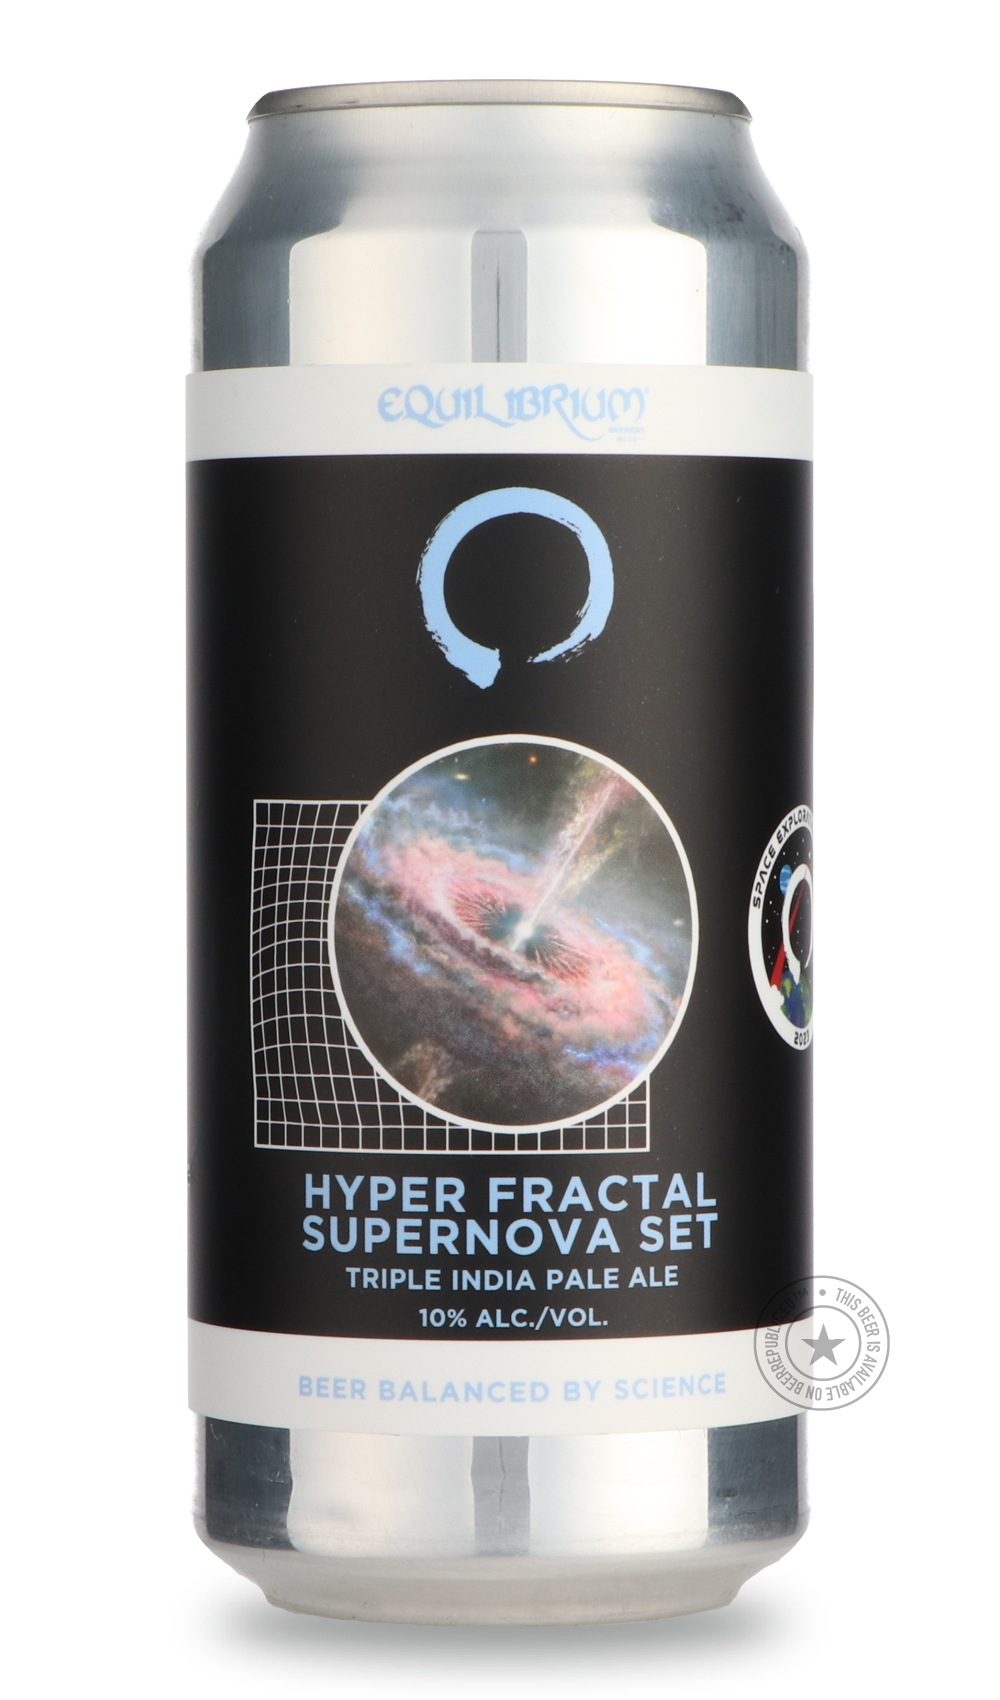 -Equilibrium- Hyper Fractal Supernova Set-IPA- Only @ Beer Republic - The best online beer store for American & Canadian craft beer - Buy beer online from the USA and Canada - Bier online kopen - Amerikaans bier kopen - Craft beer store - Craft beer kopen - Amerikanisch bier kaufen - Bier online kaufen - Acheter biere online - IPA - Stout - Porter - New England IPA - Hazy IPA - Imperial Stout - Barrel Aged - Barrel Aged Imperial Stout - Brown - Dark beer - Blond - Blonde - Pilsner - Lager - Wheat - Weizen -